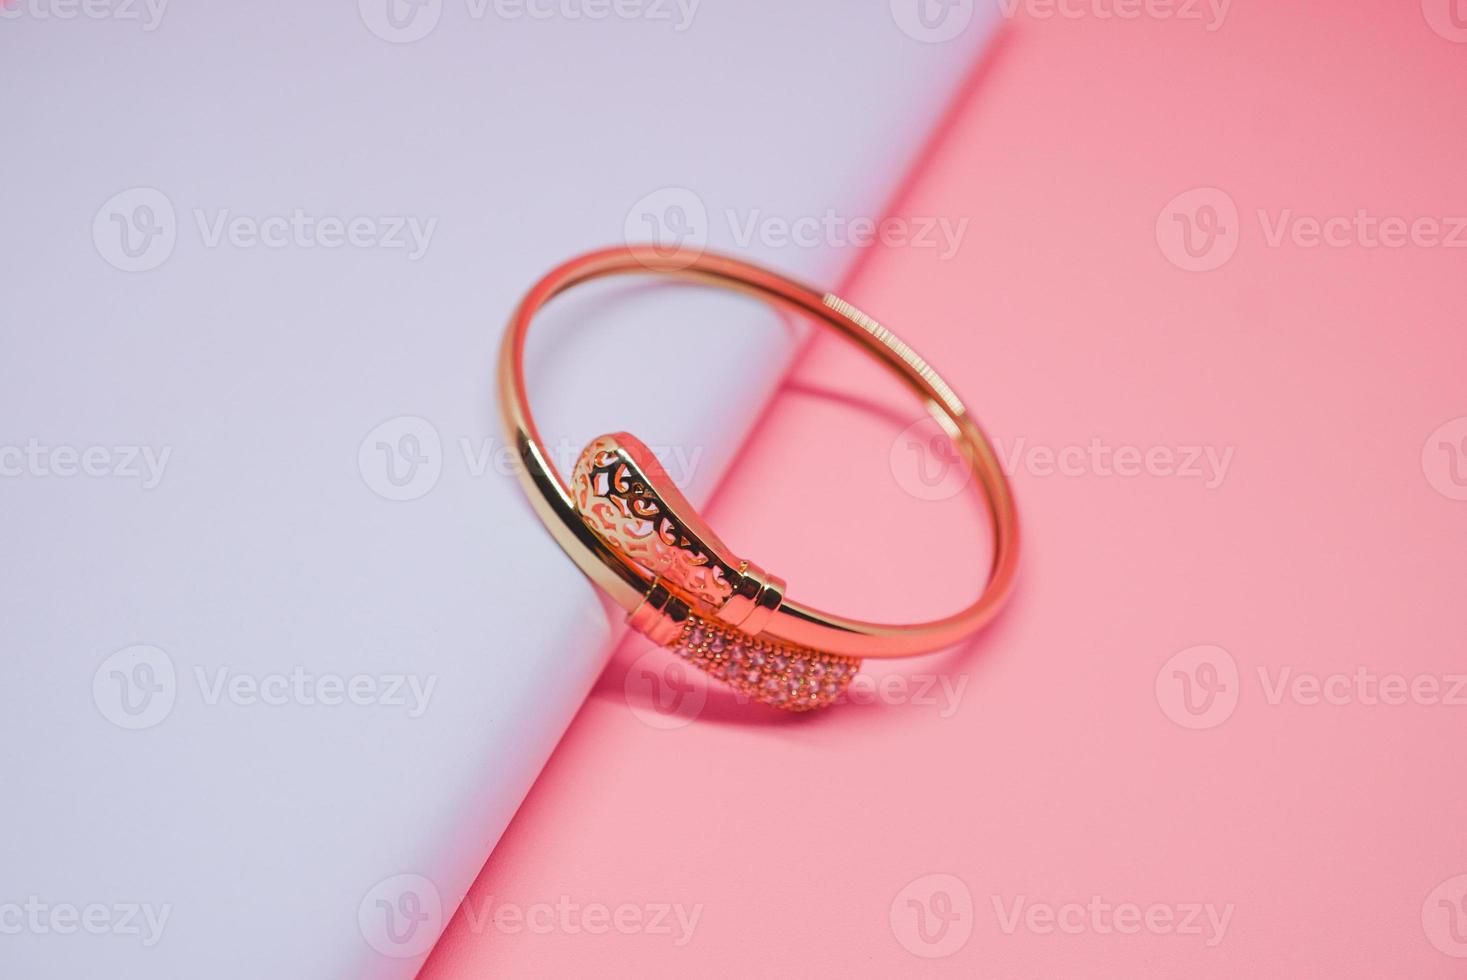 Thaise luxe damesarmband foto op roze achtergrond